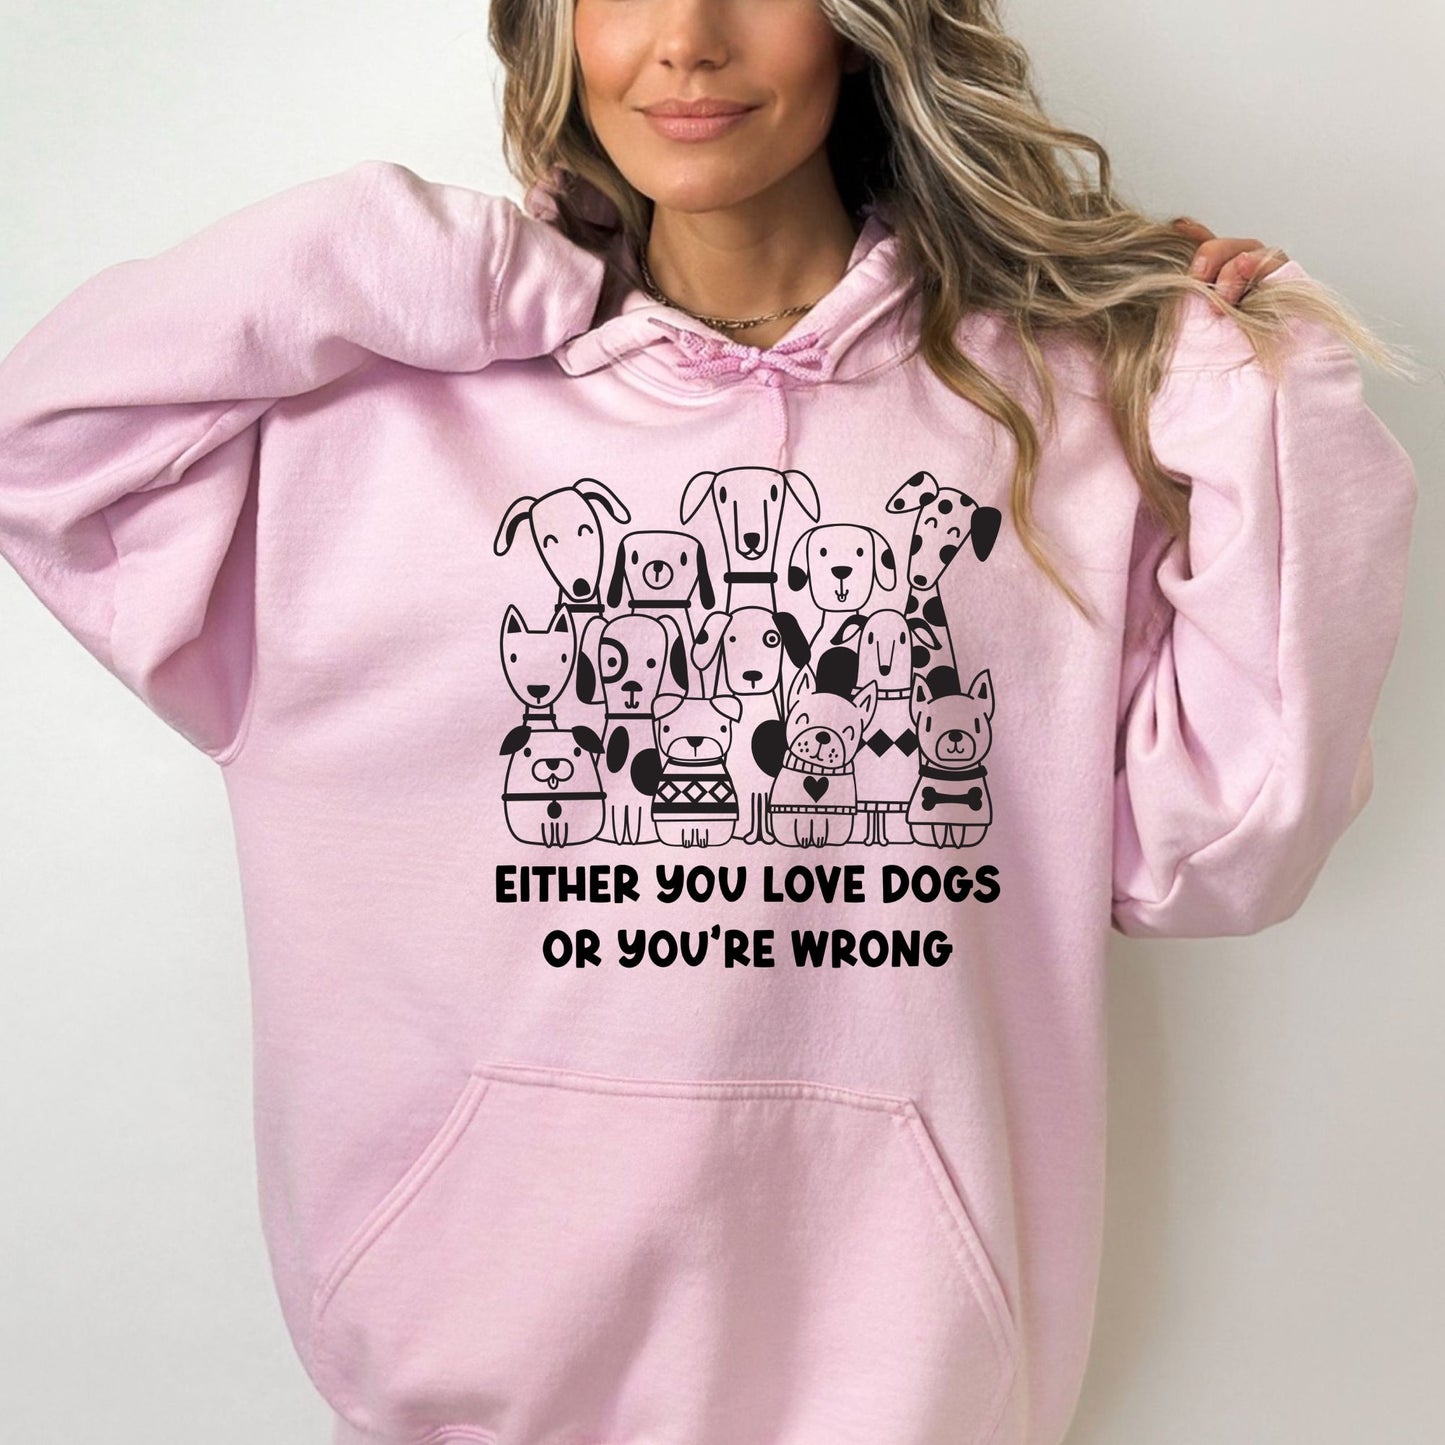 Either You Love Dogs or You're Wrong Hoodie Sweatshirt - PuppyJo Hoodie S / Light Pink